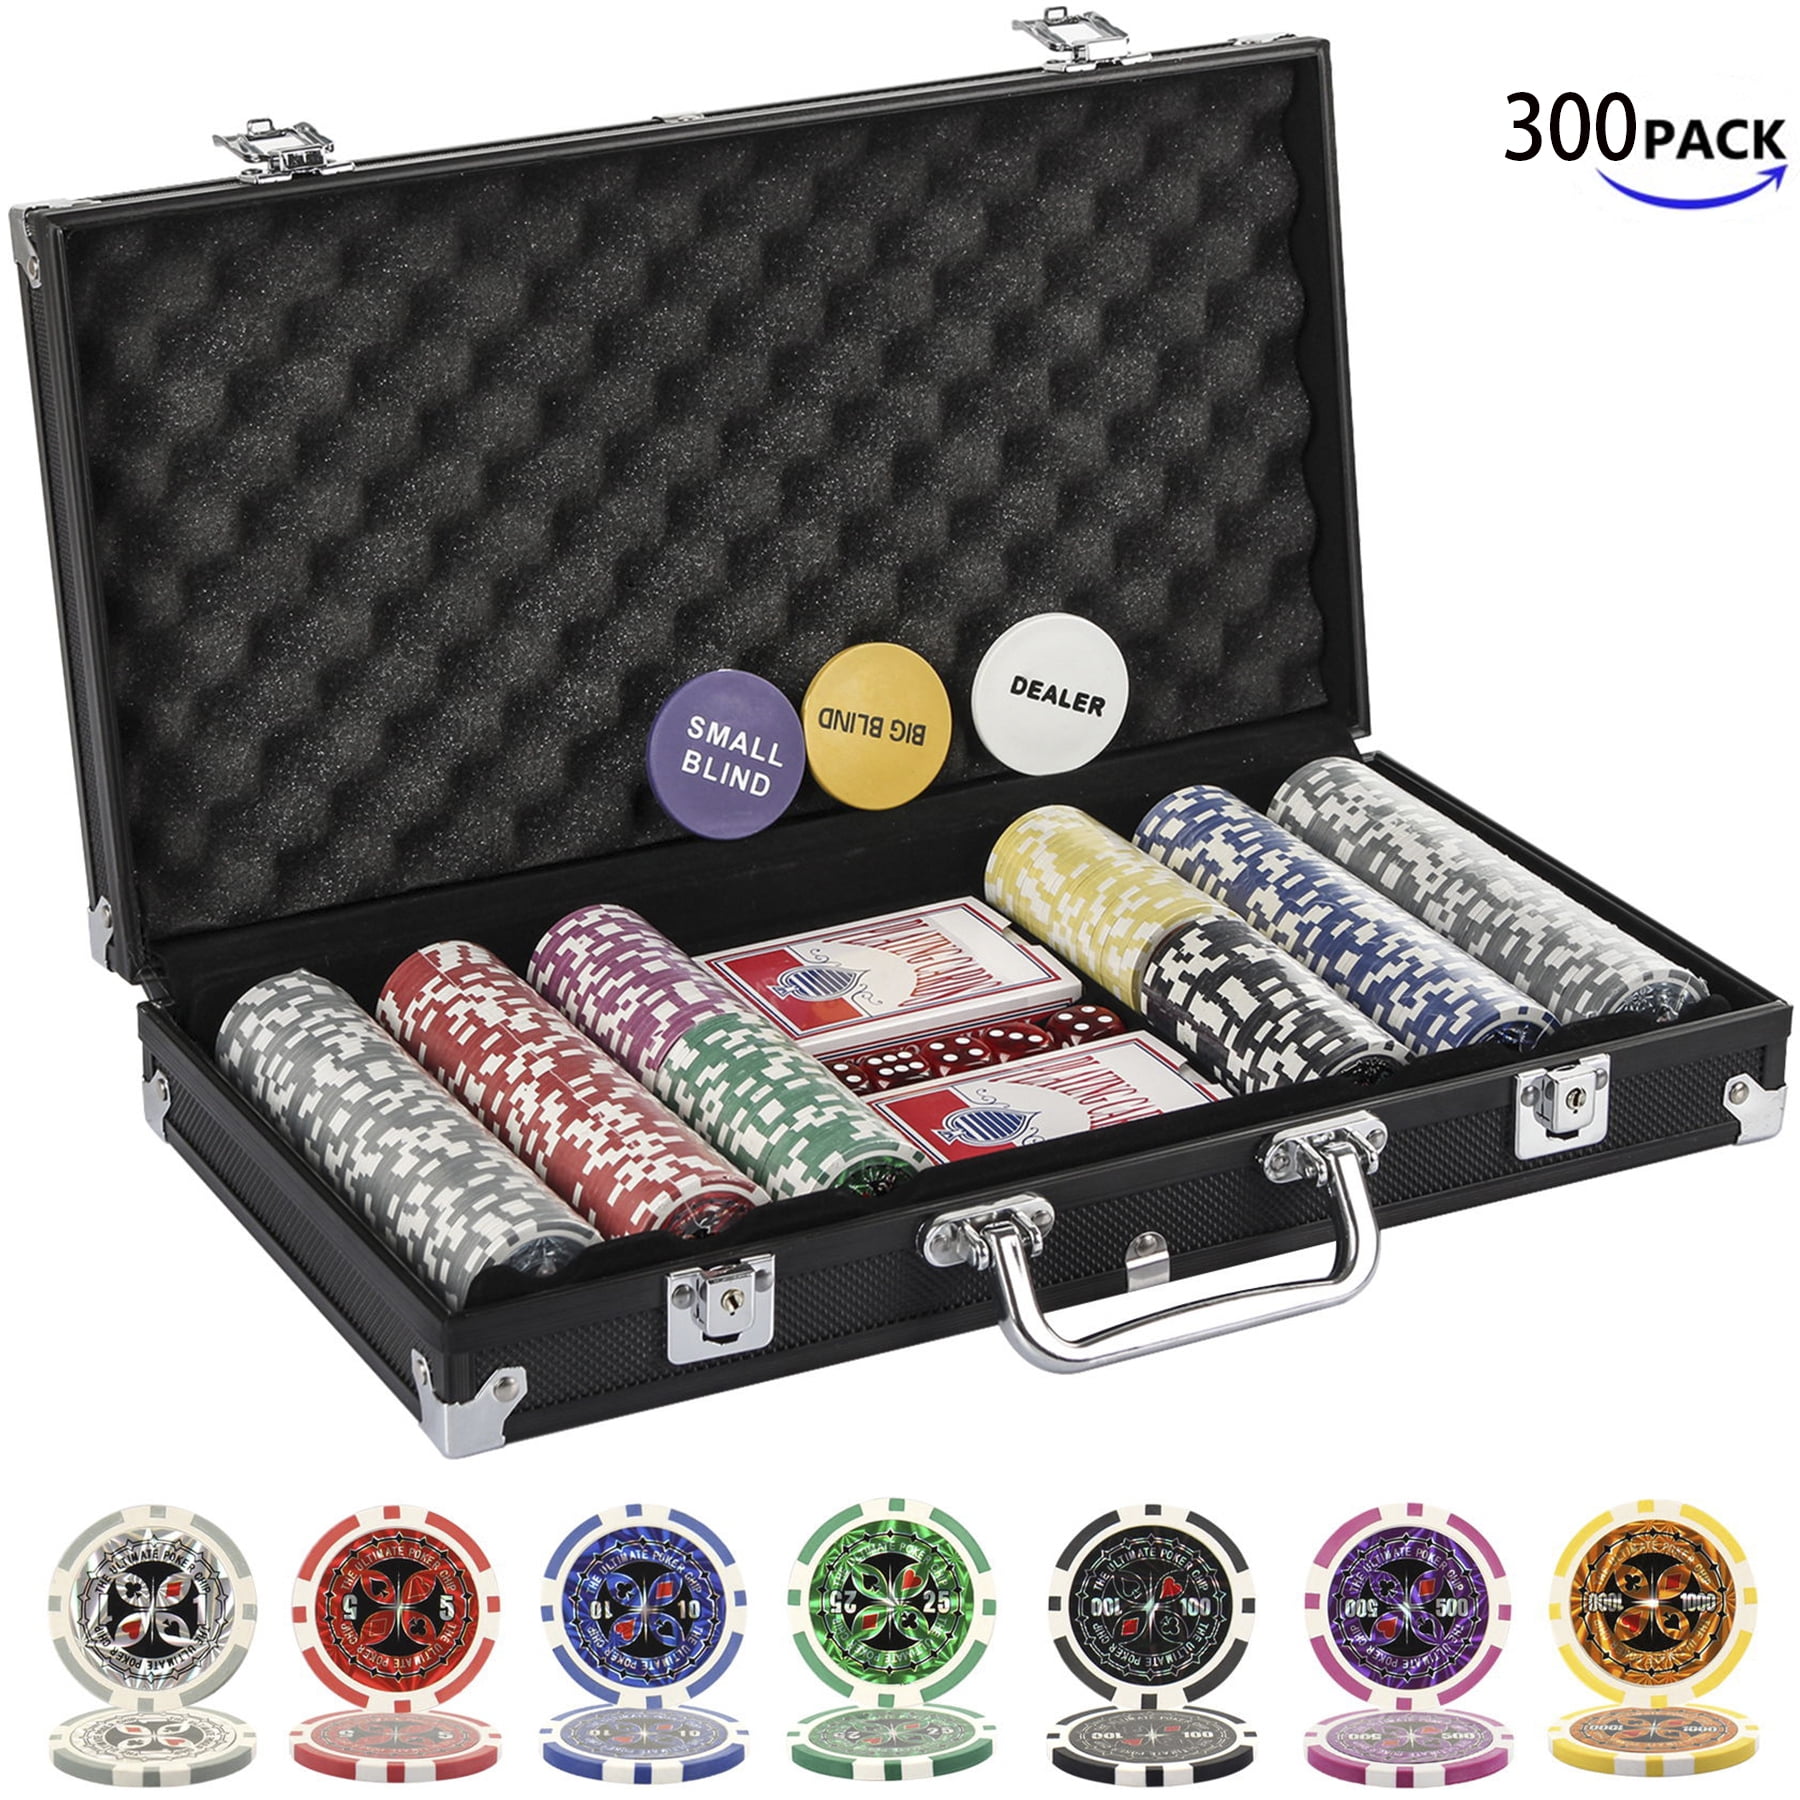 NEW 500 PC Poker Knights 13.5 Gram Clay Poker Chips Bulk Lot Mix or Match Chips 